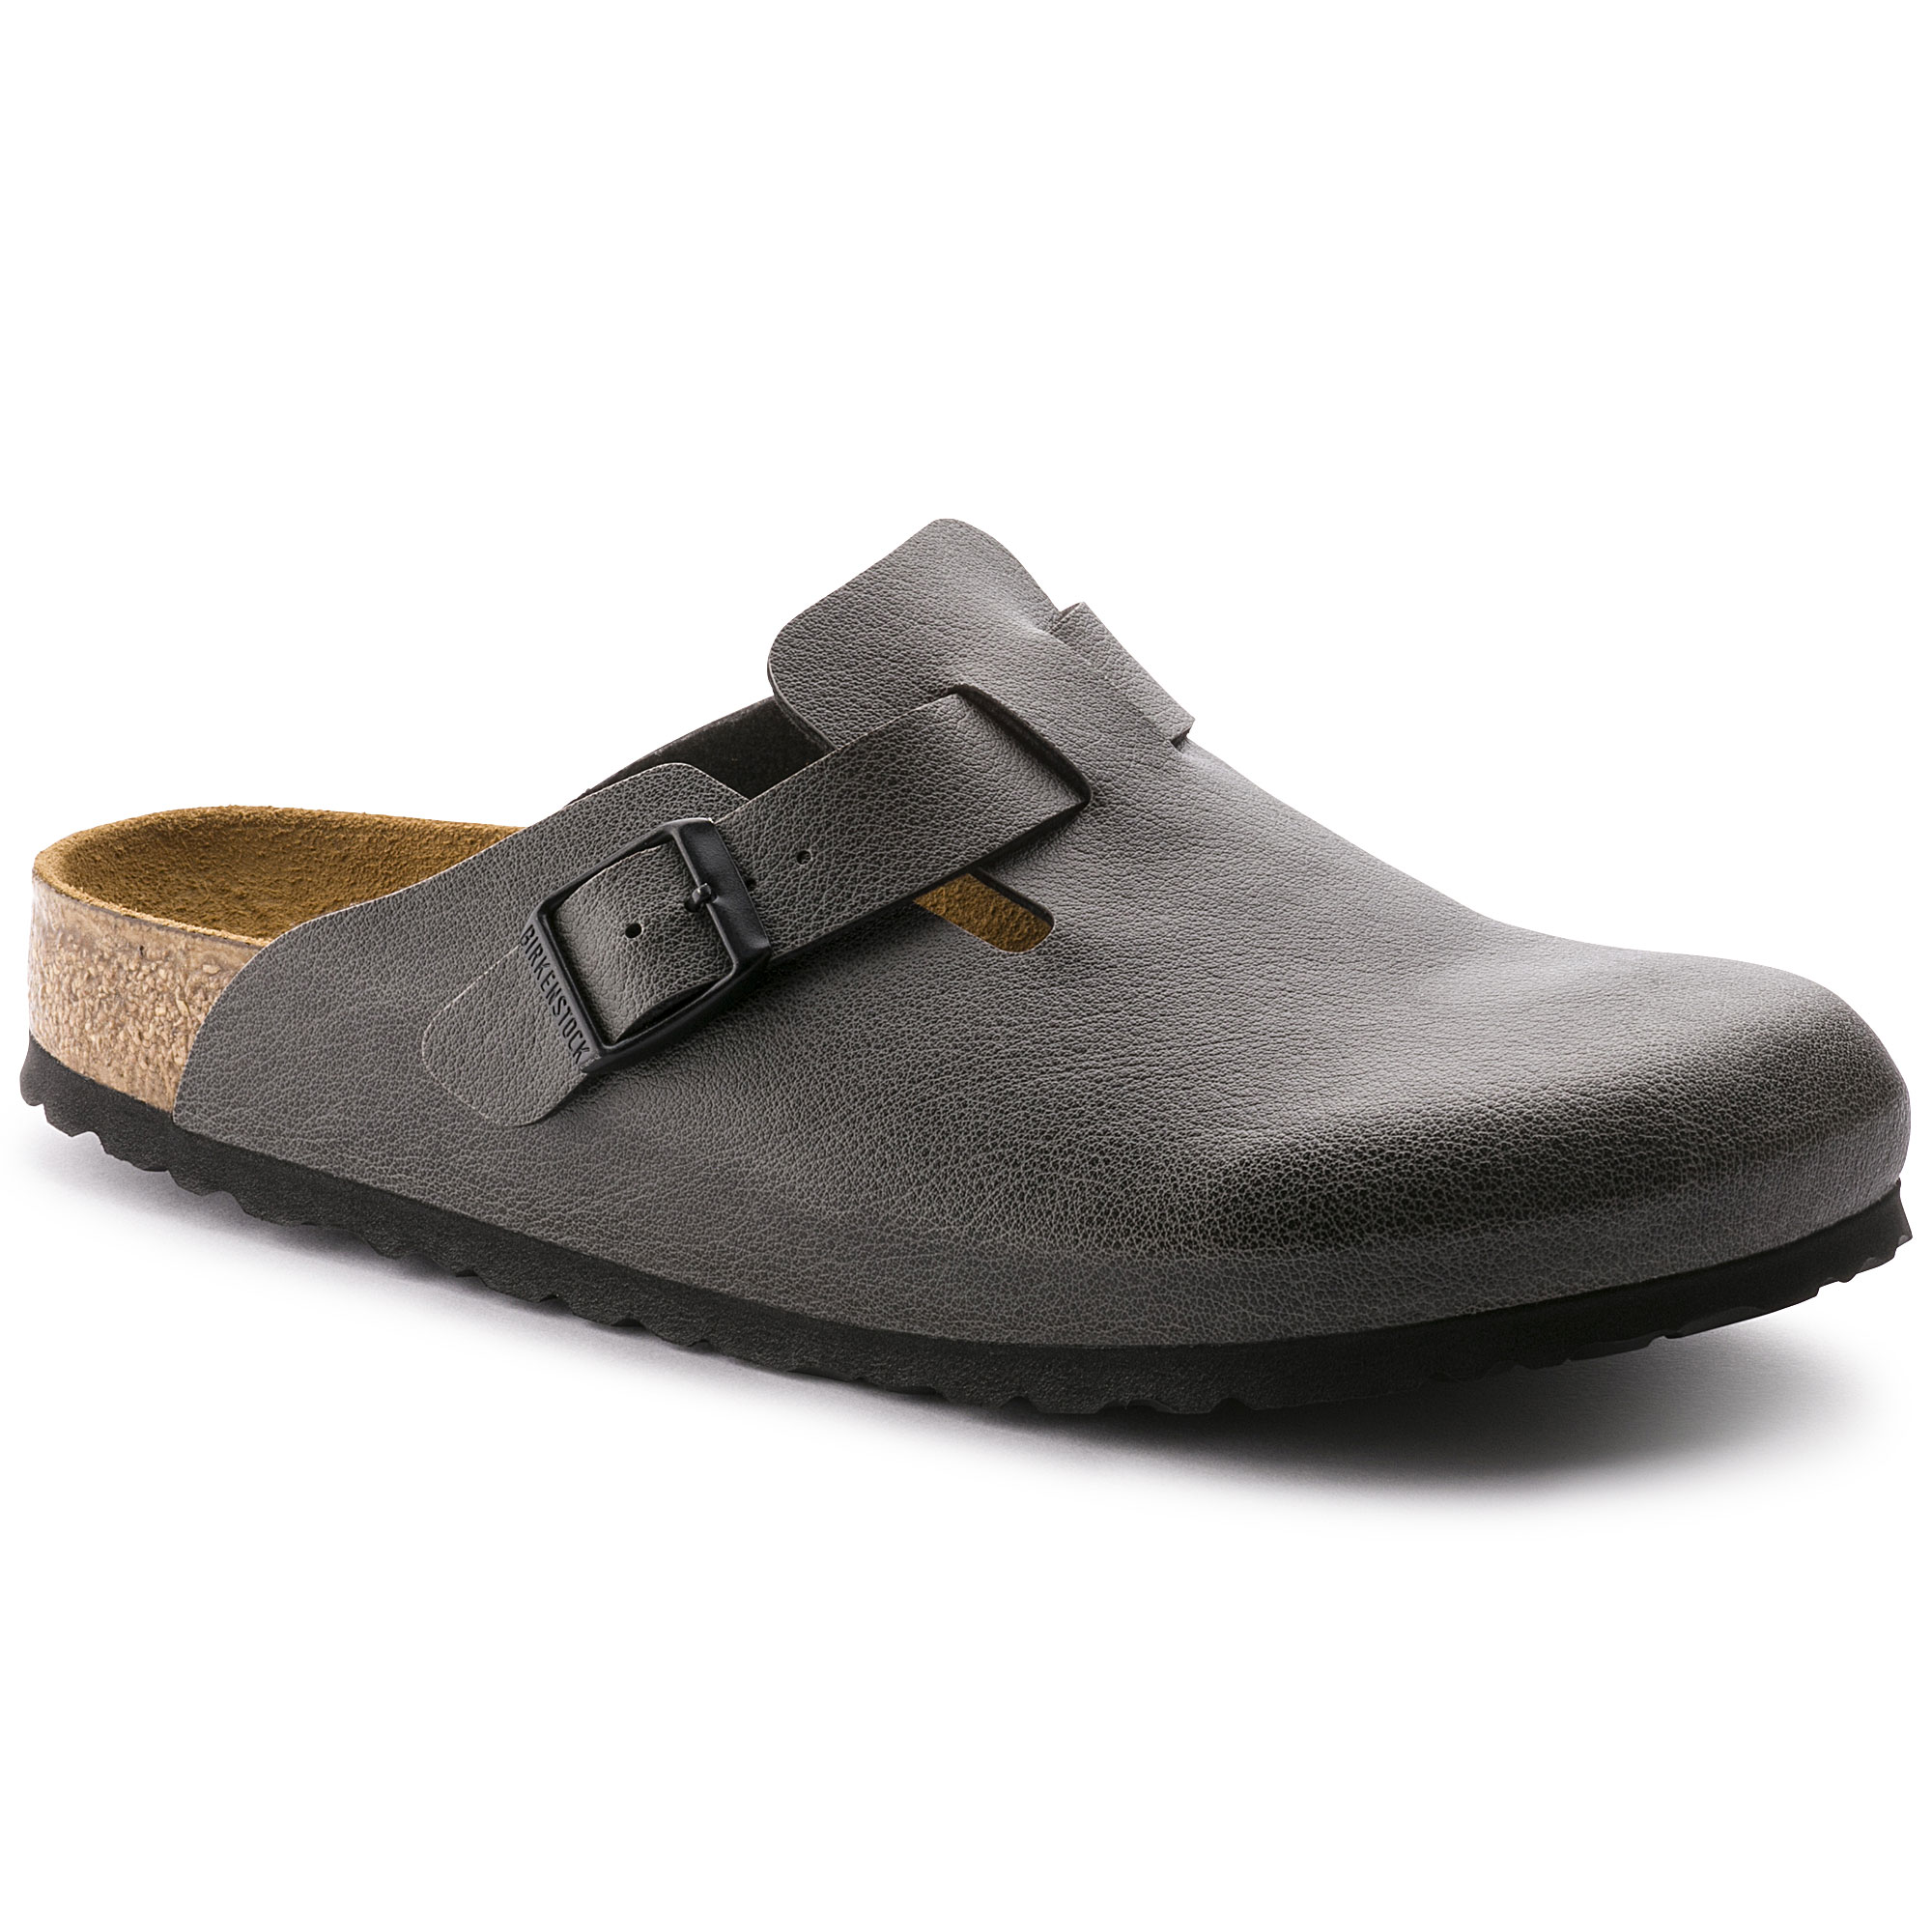 mary jane t bar school shoes